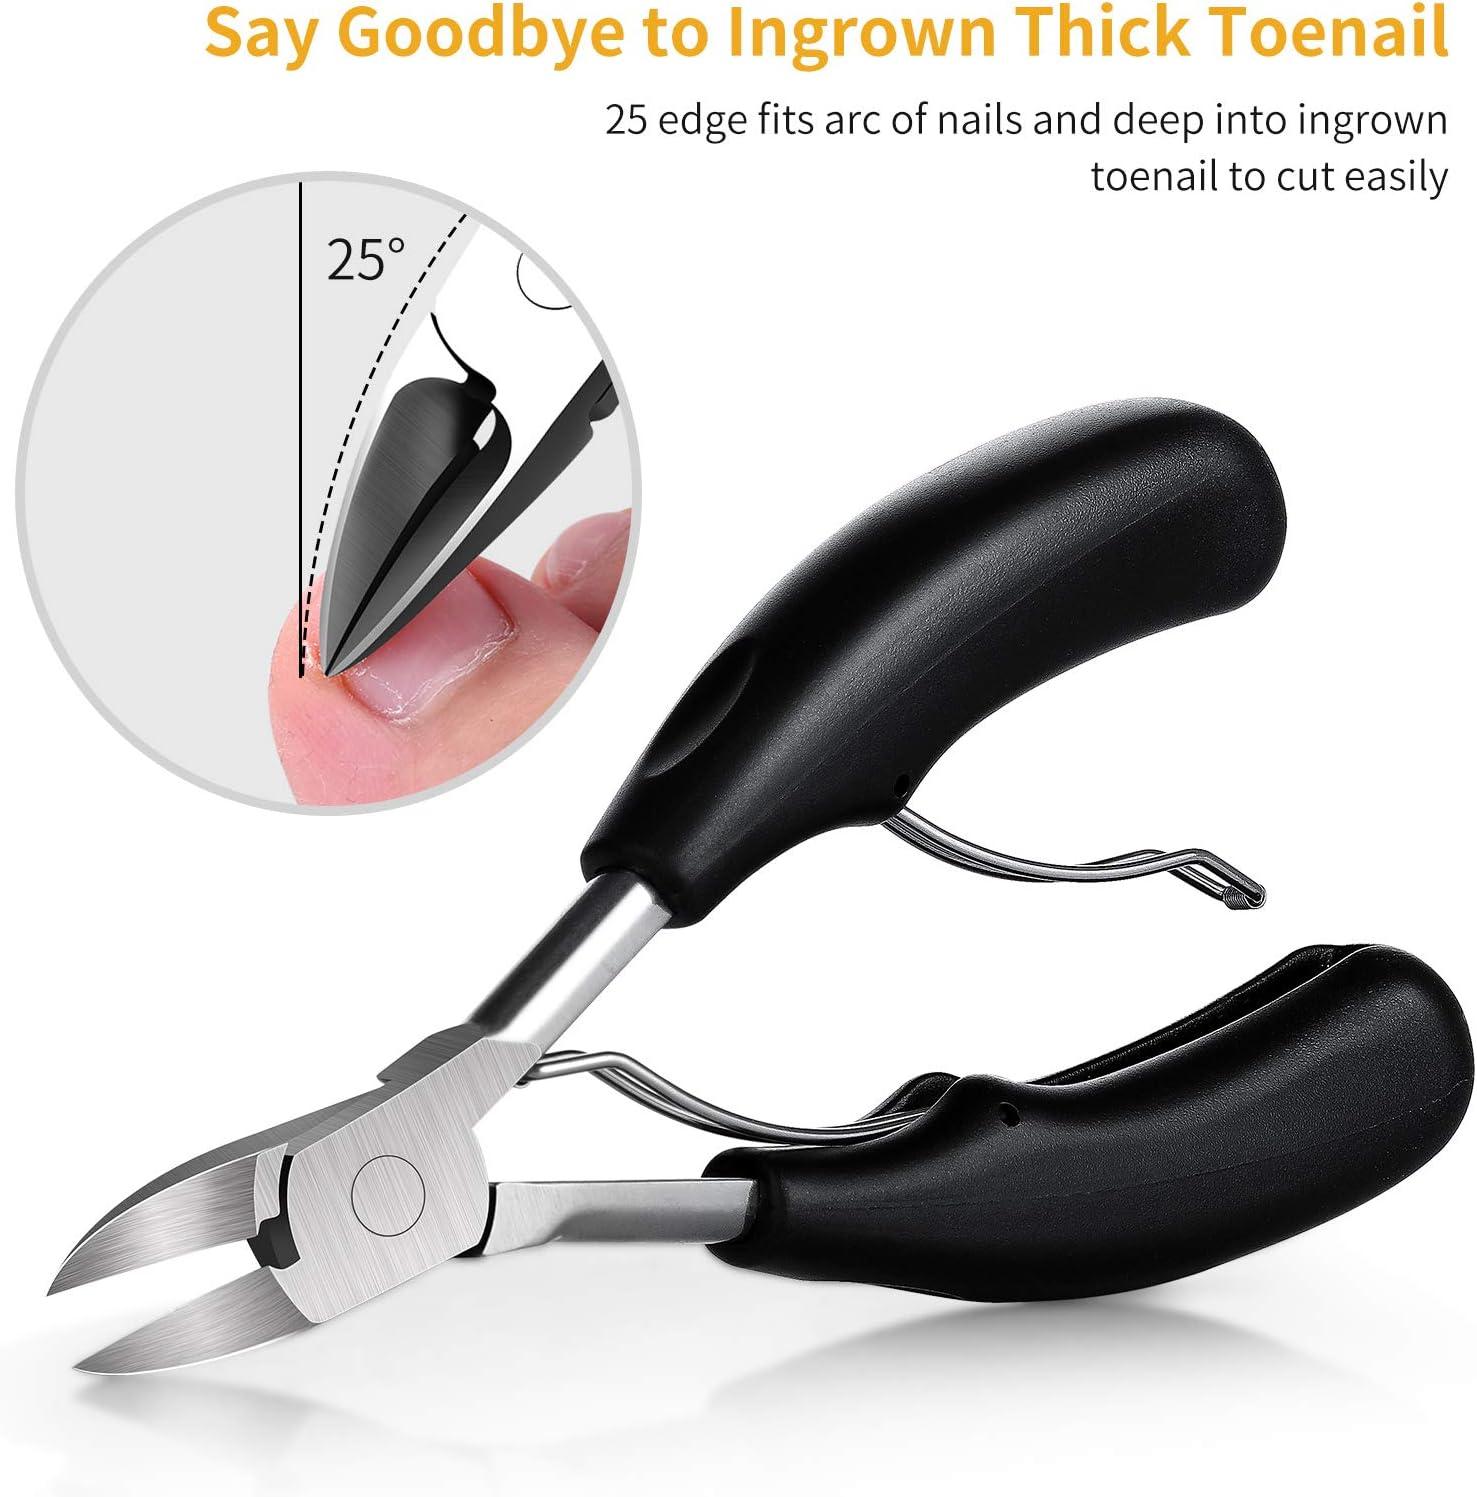 Nail Clippers For Thick Nails Review 2020 —Best Toenail Clippers